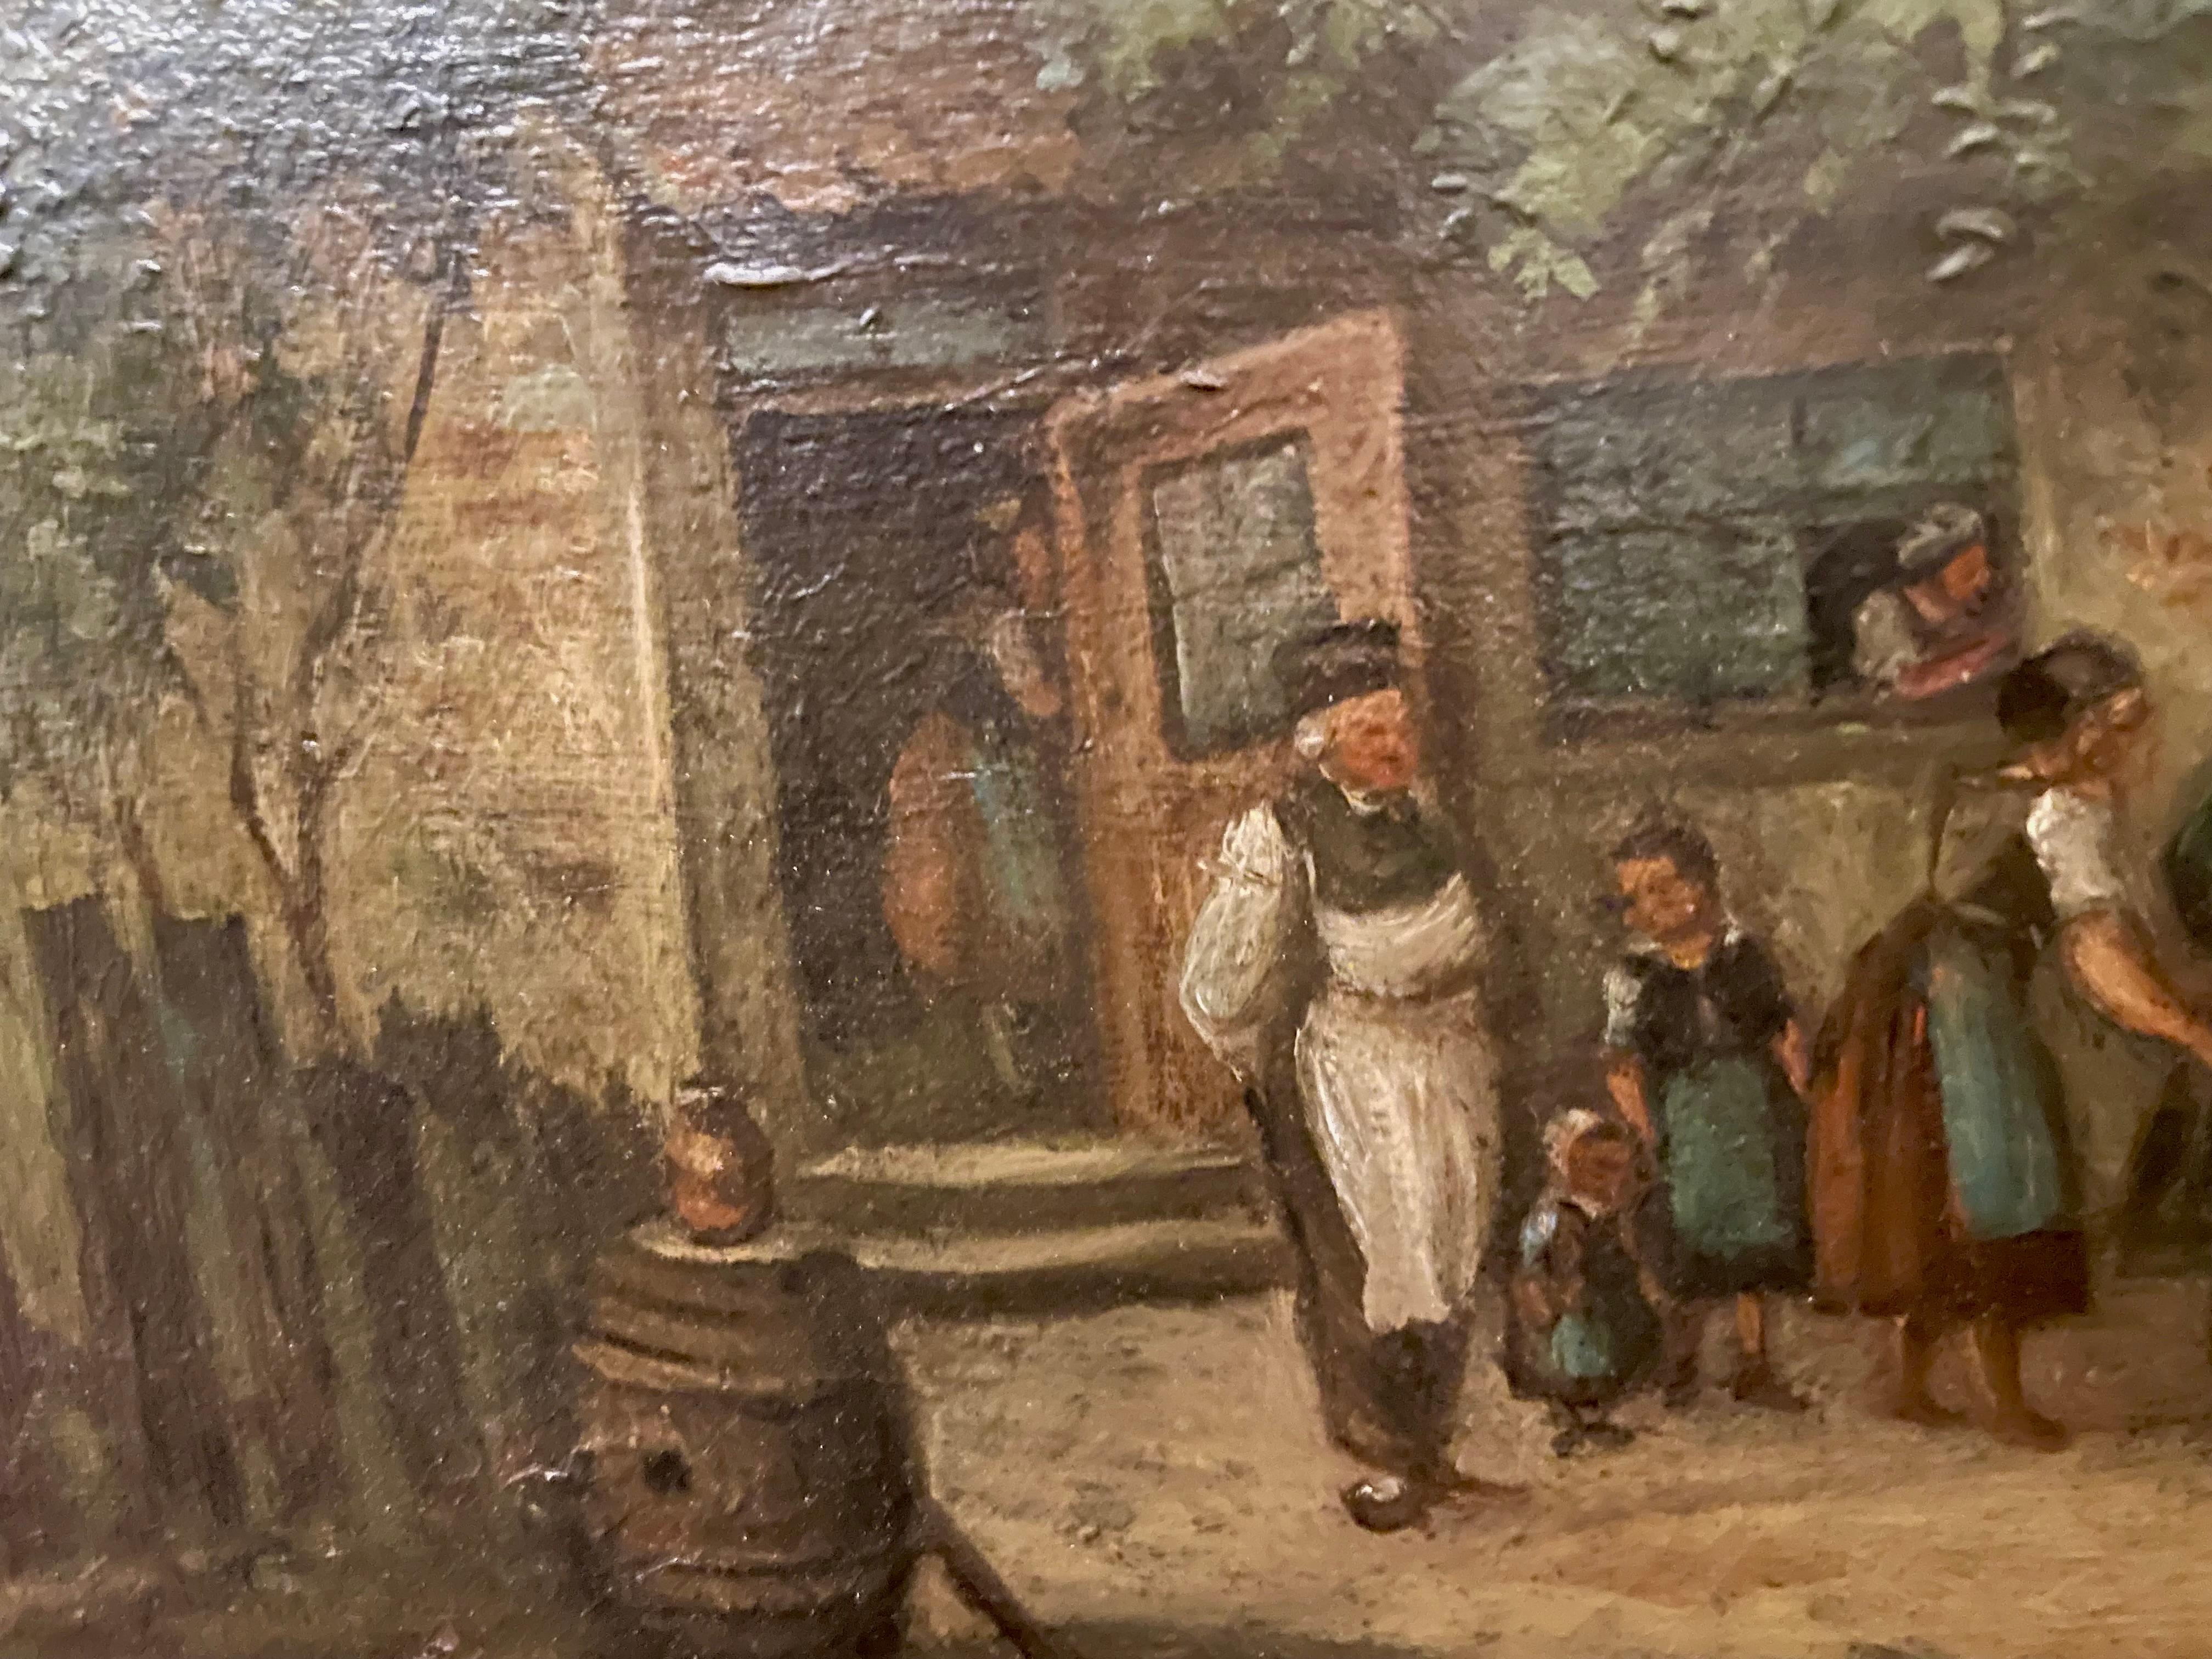 Fine 19th century oil painting of bustling Austria/Germanic village with horse, rider and various figures outside an Inn, attributed to Arthur Georg Ramberg (1819-1879), well known for figurative paintings. The rider is apparently bringing news to